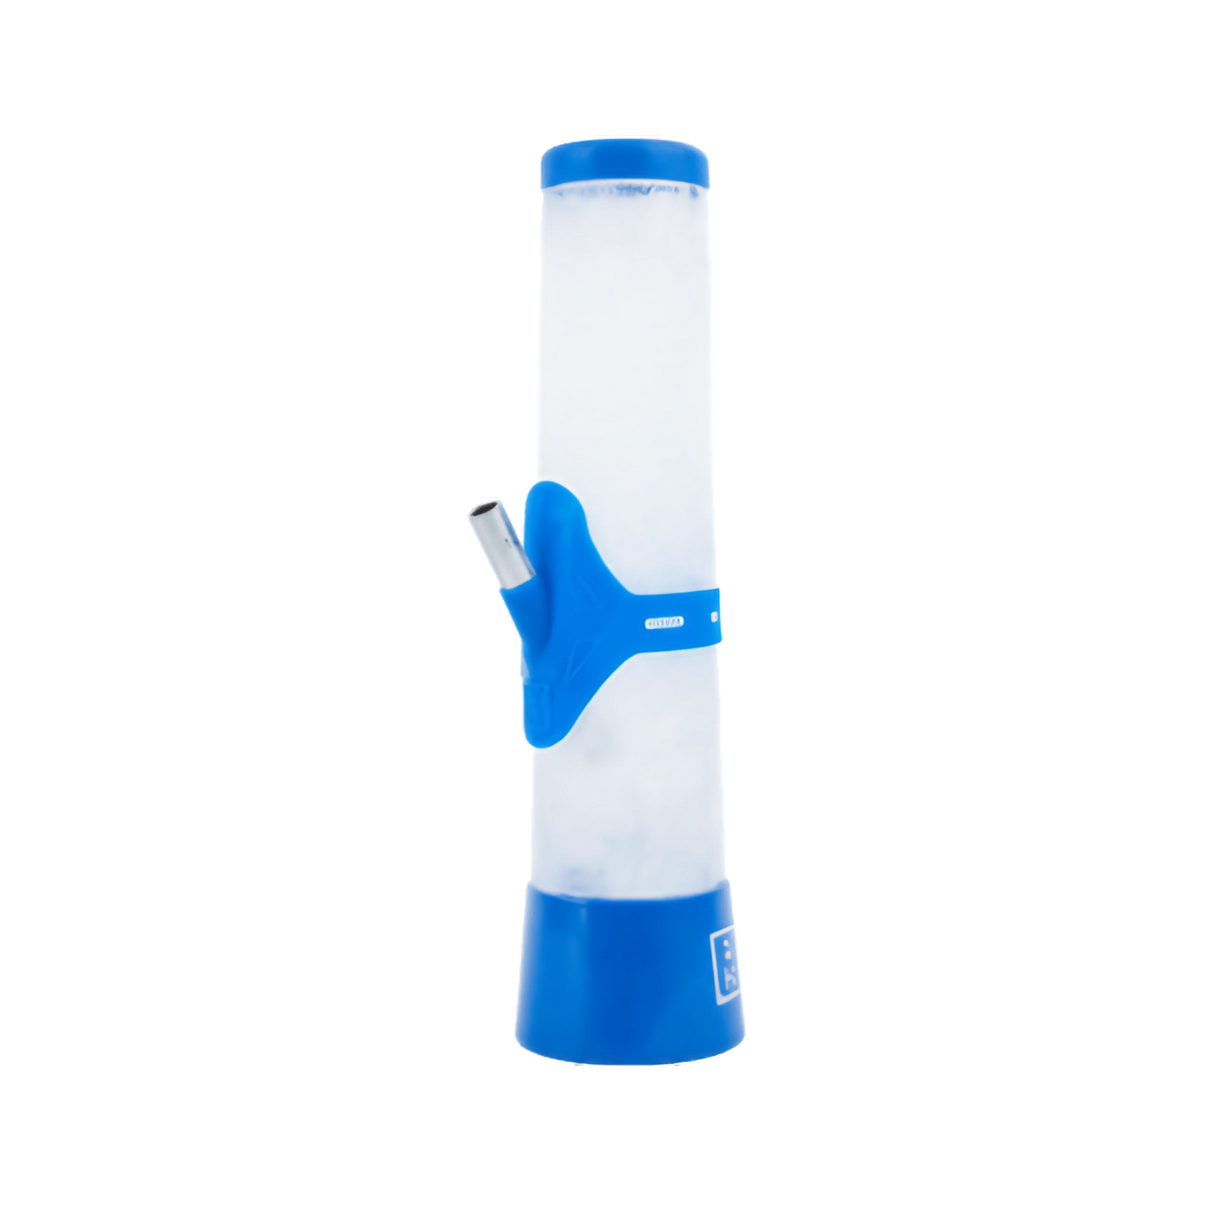 EYCE 2.0 Silicone Bong in Blue, Portable 12.75" Straight Design with 10mm Joint, Front View